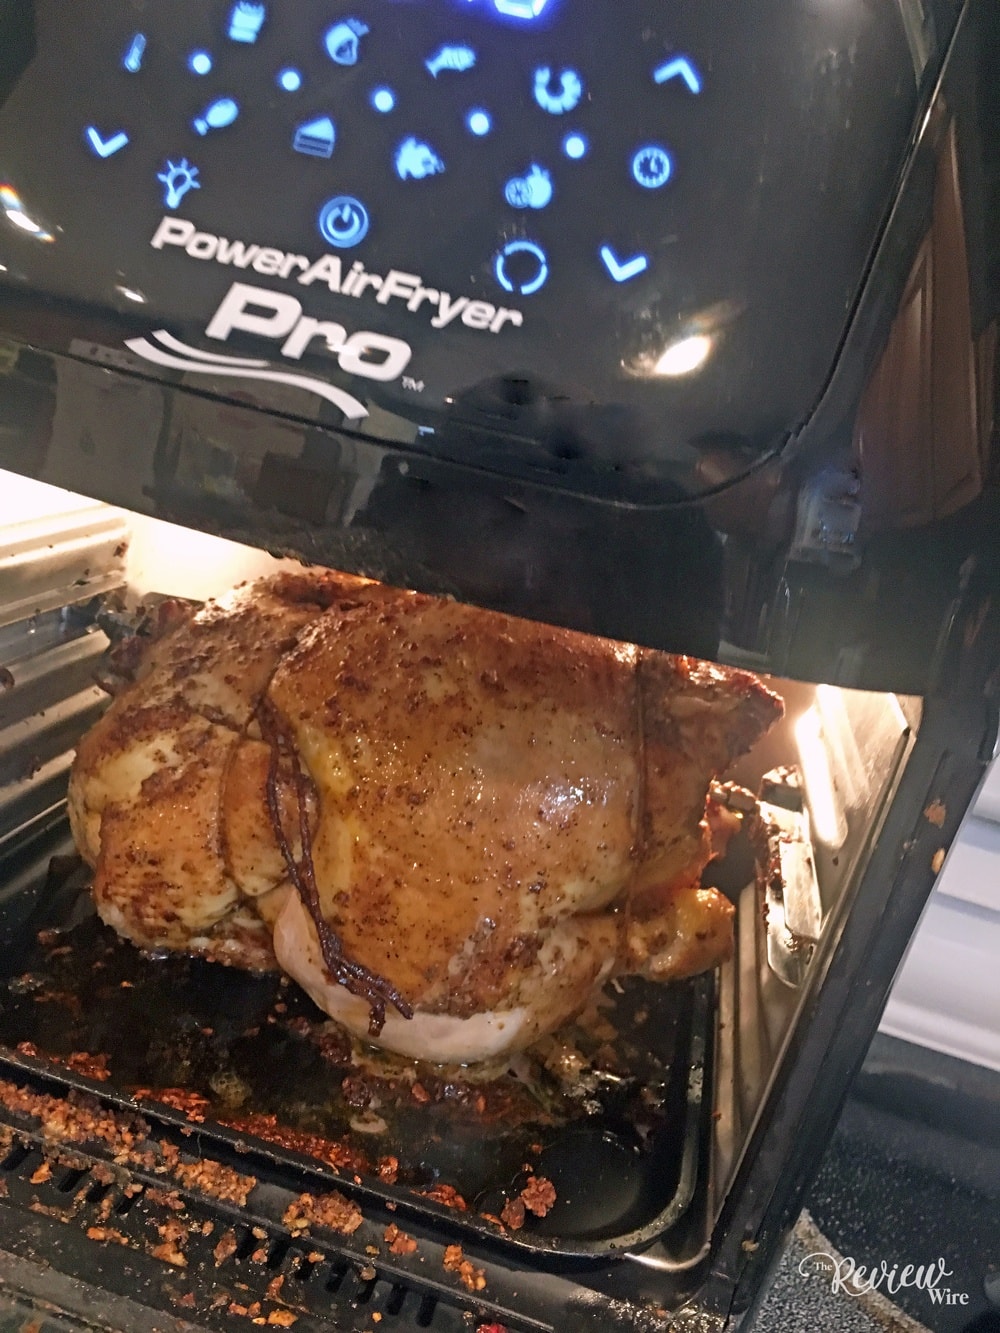 https://thereviewwire.com/wp-content/uploads/2020/04/Power-Air-Fryer-PRO_-Whole-Chicken.jpg